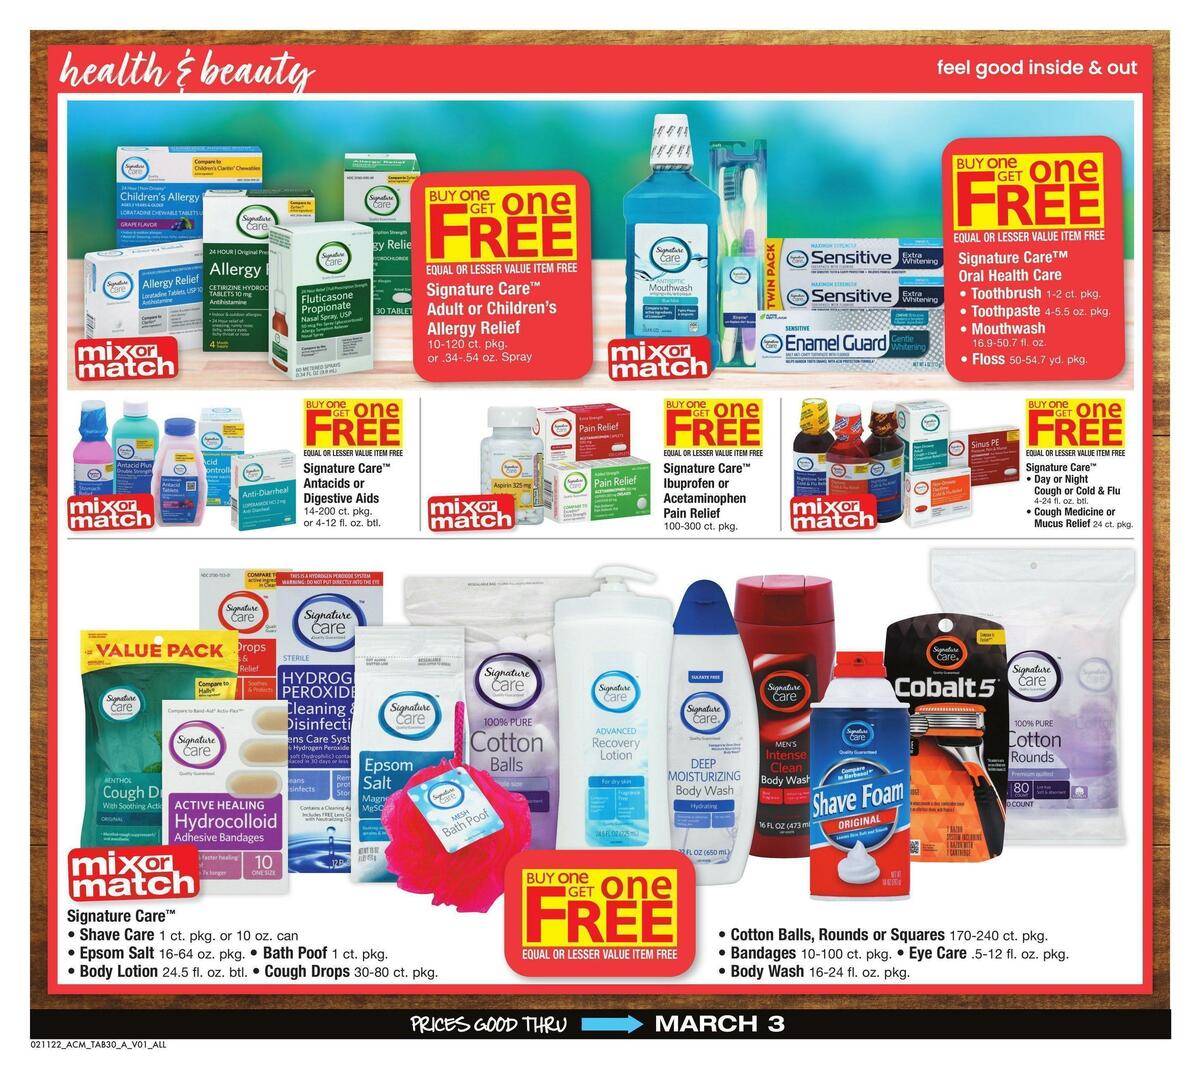 ACME Markets Big Book of Savings Weekly Ad from February 11